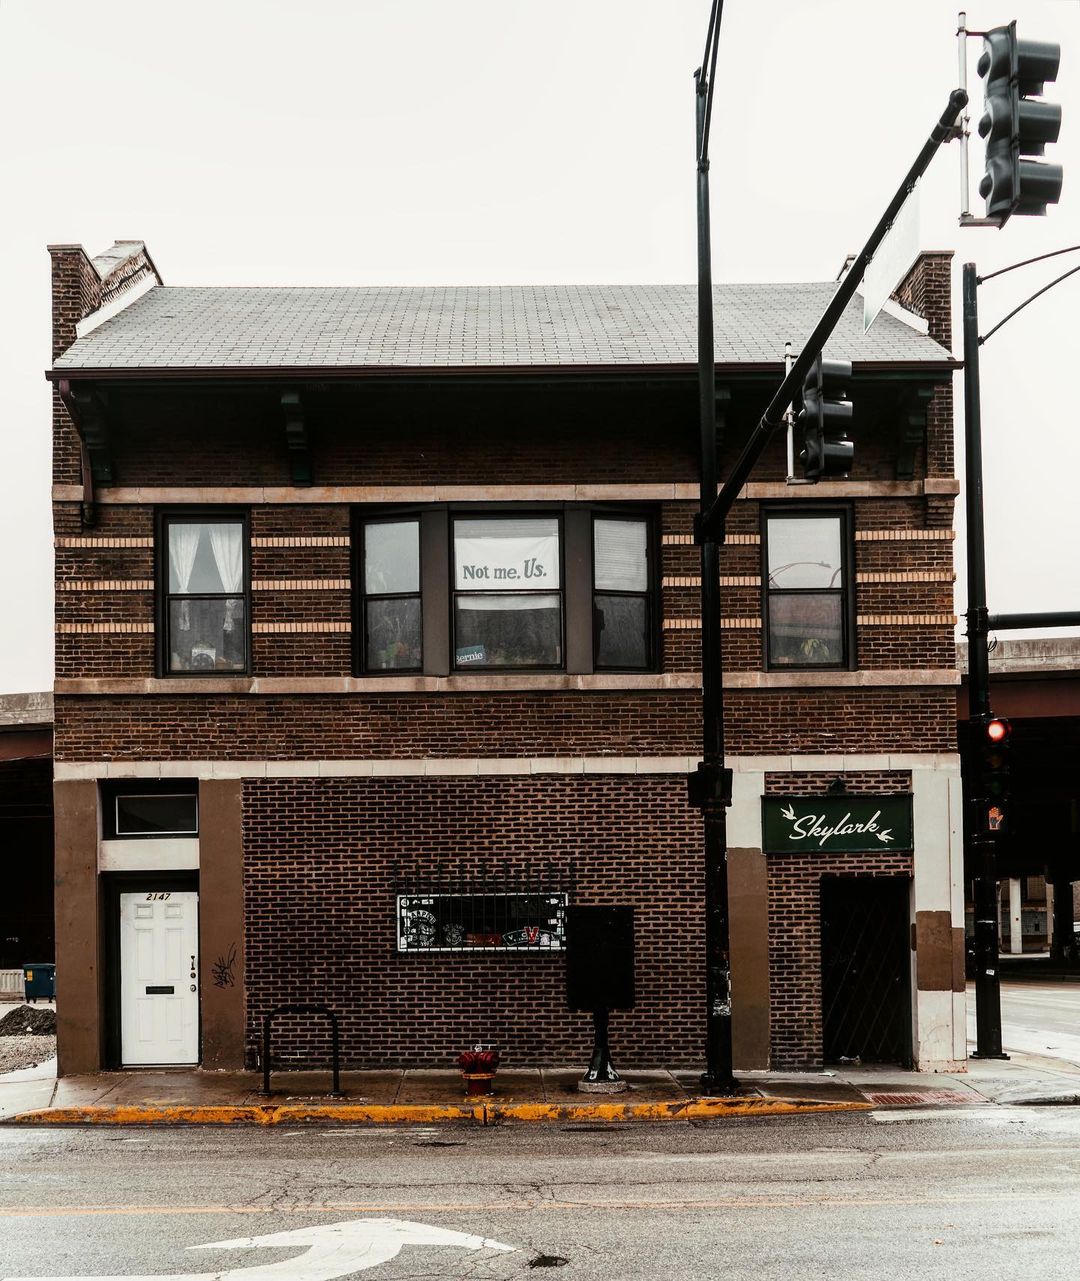 Exterior Photo of the Skylark in Chicago. Photo by Instagram user @wade____hall